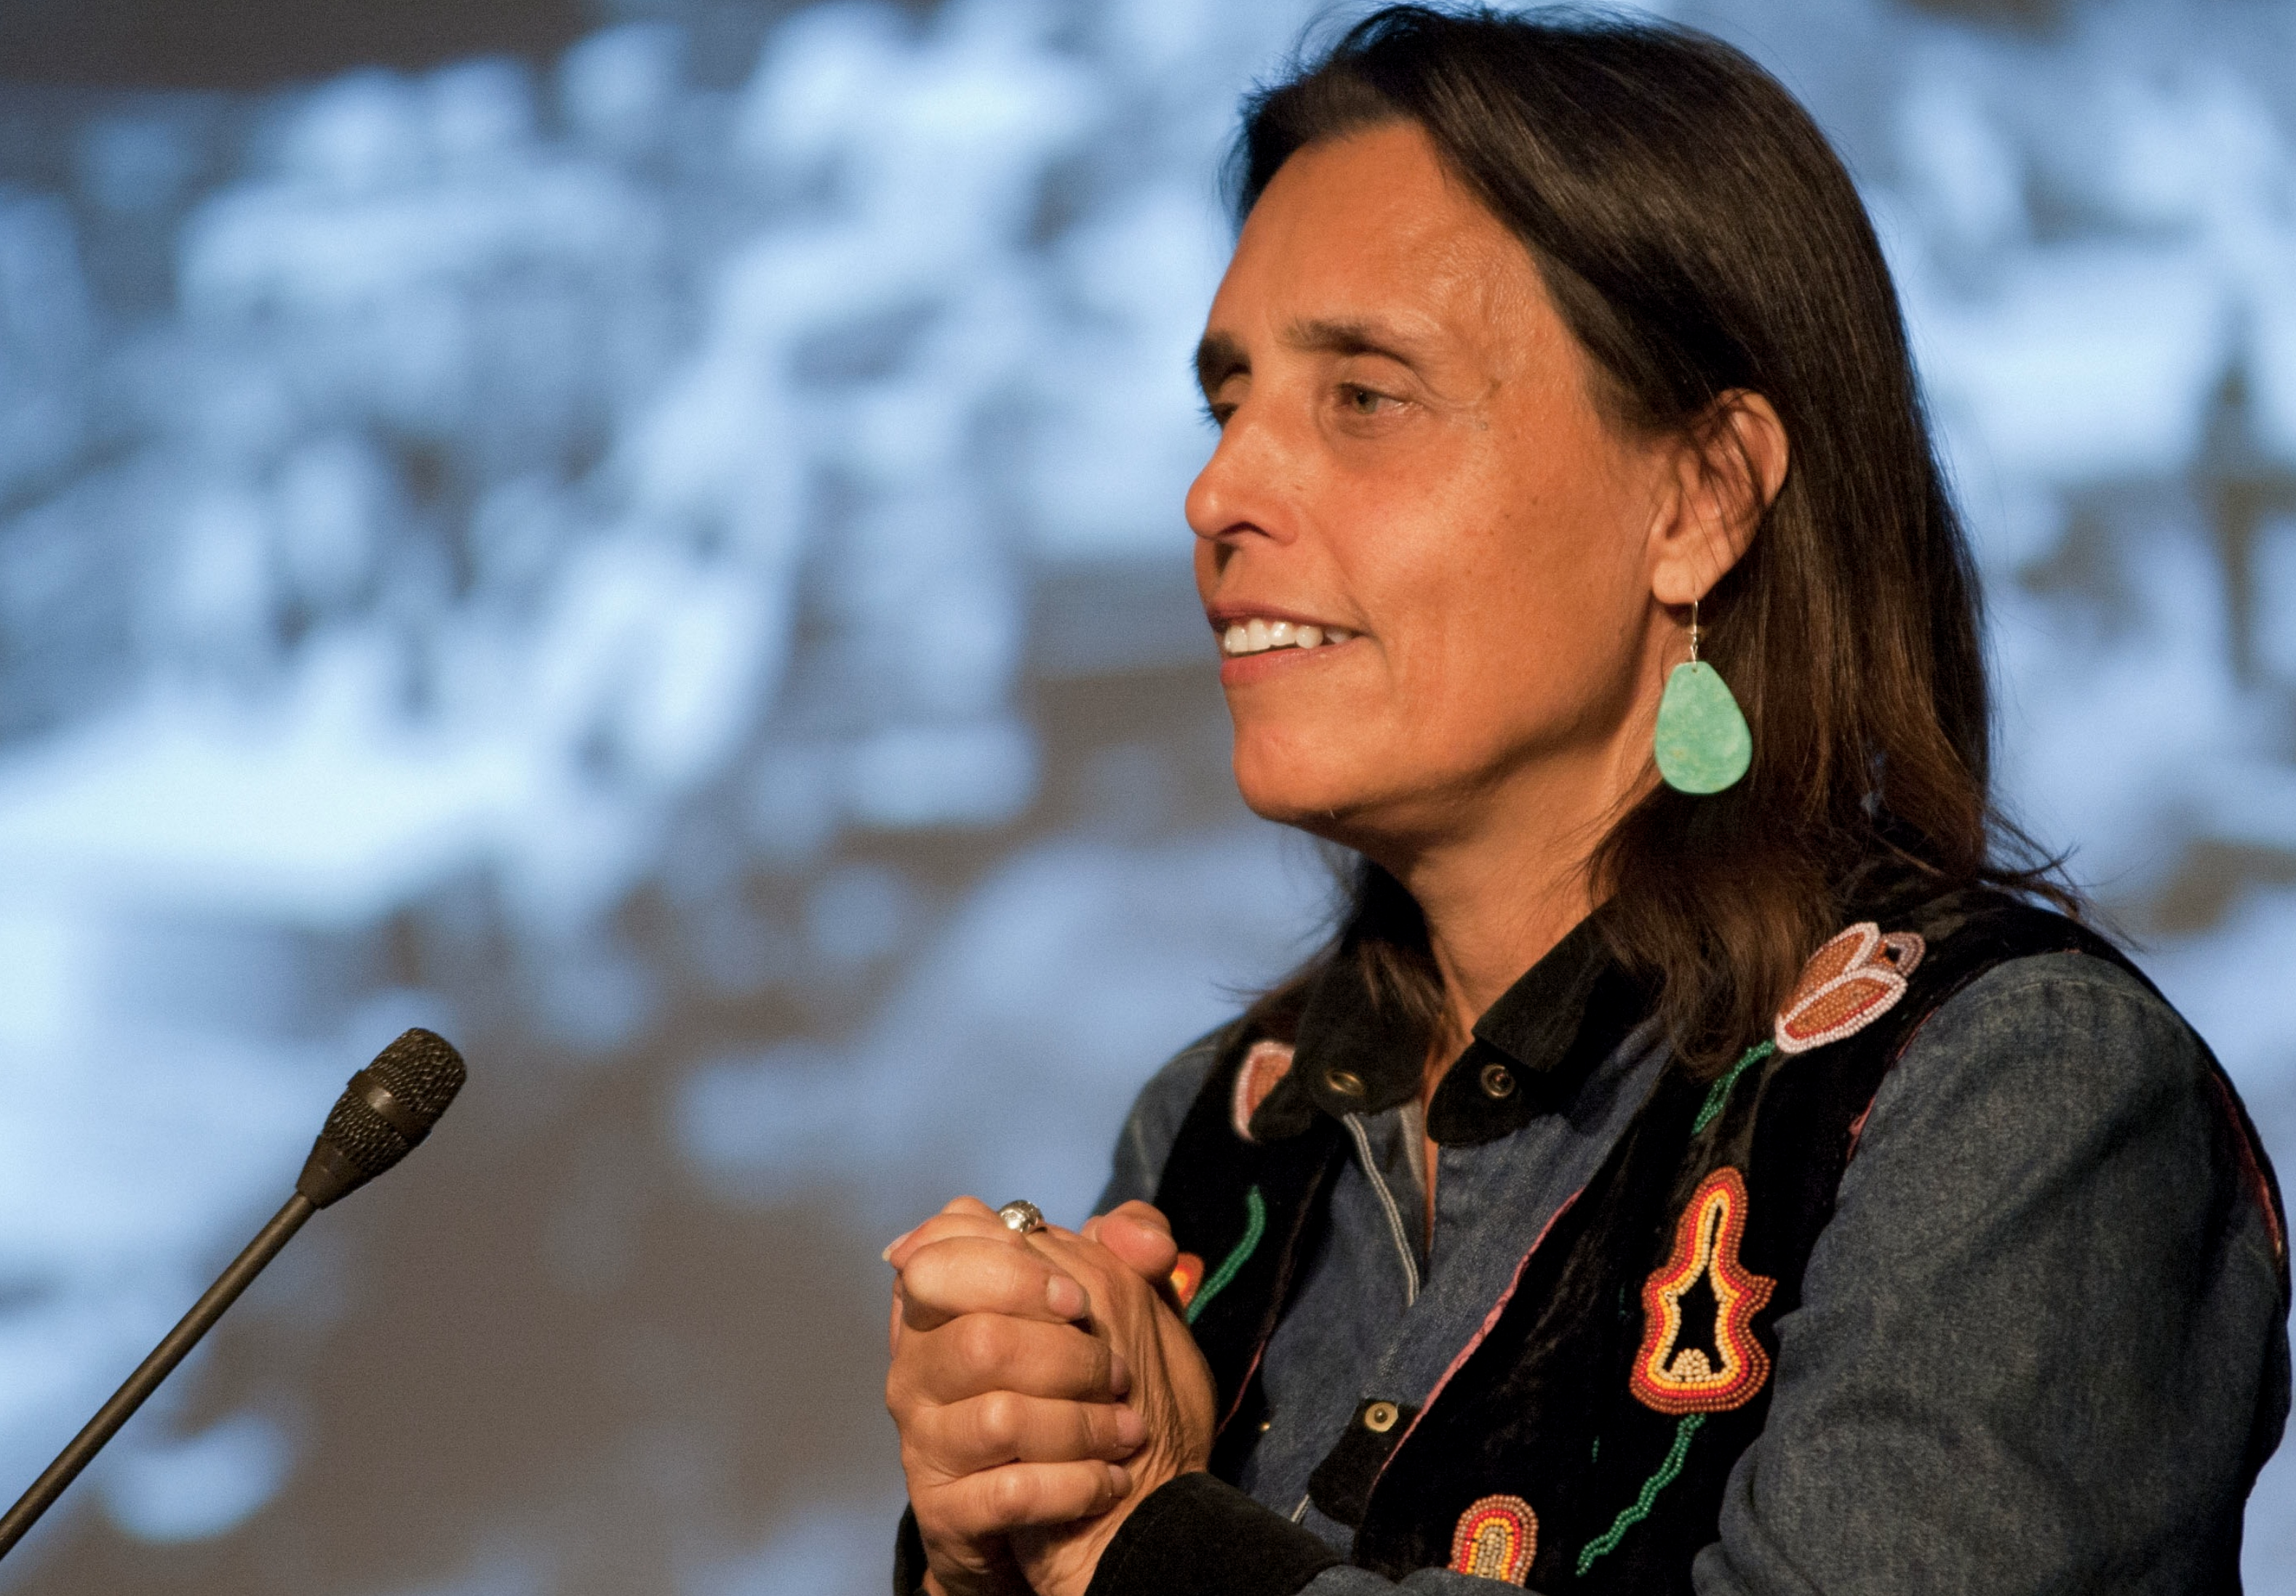 Winona LaDuke smiling on stage in front of a microphone